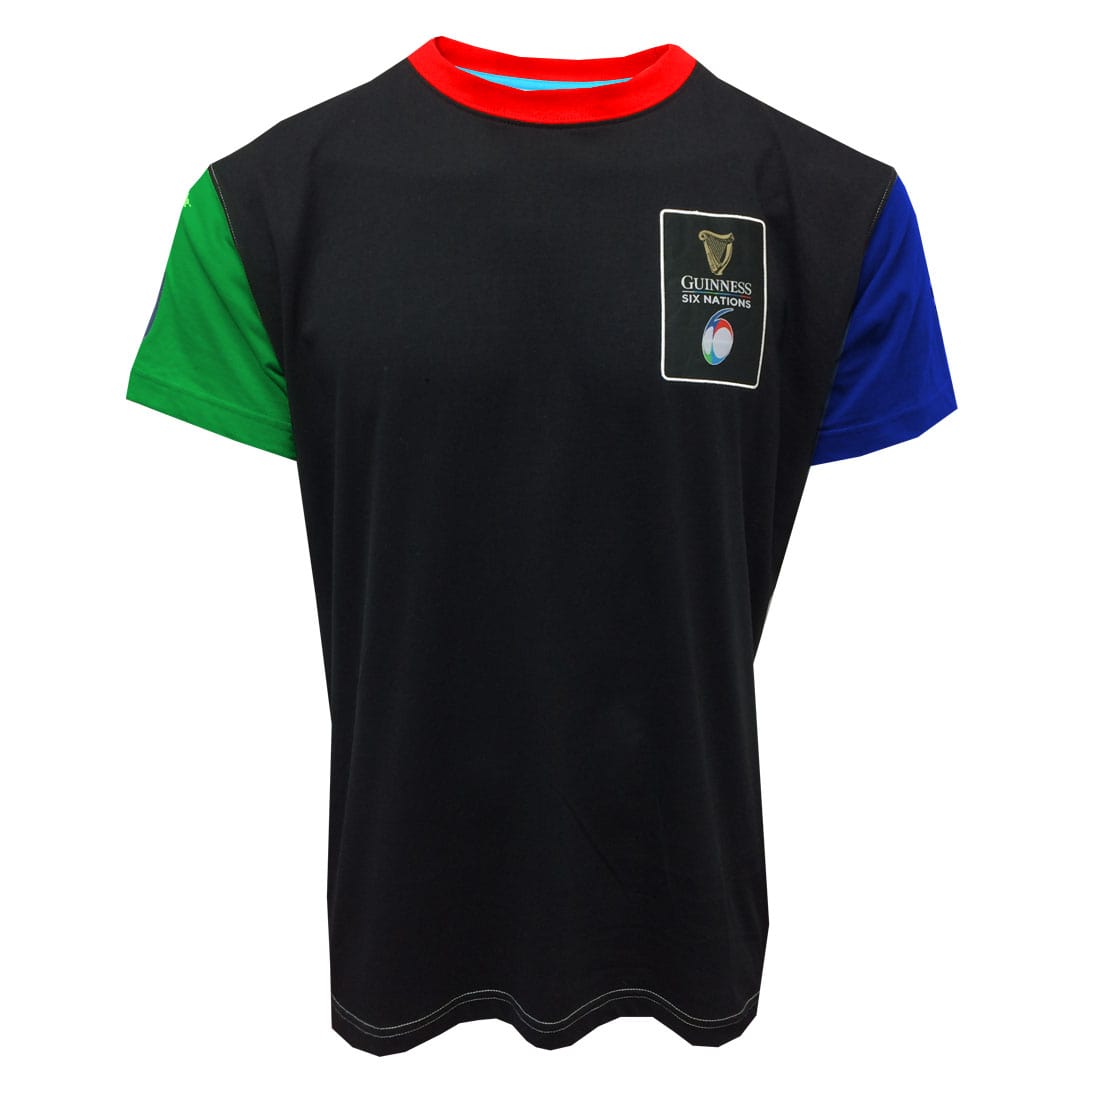 A Guinness UK Six Nations Premium Colour Block T-Shirt featuring the Ireland flag.